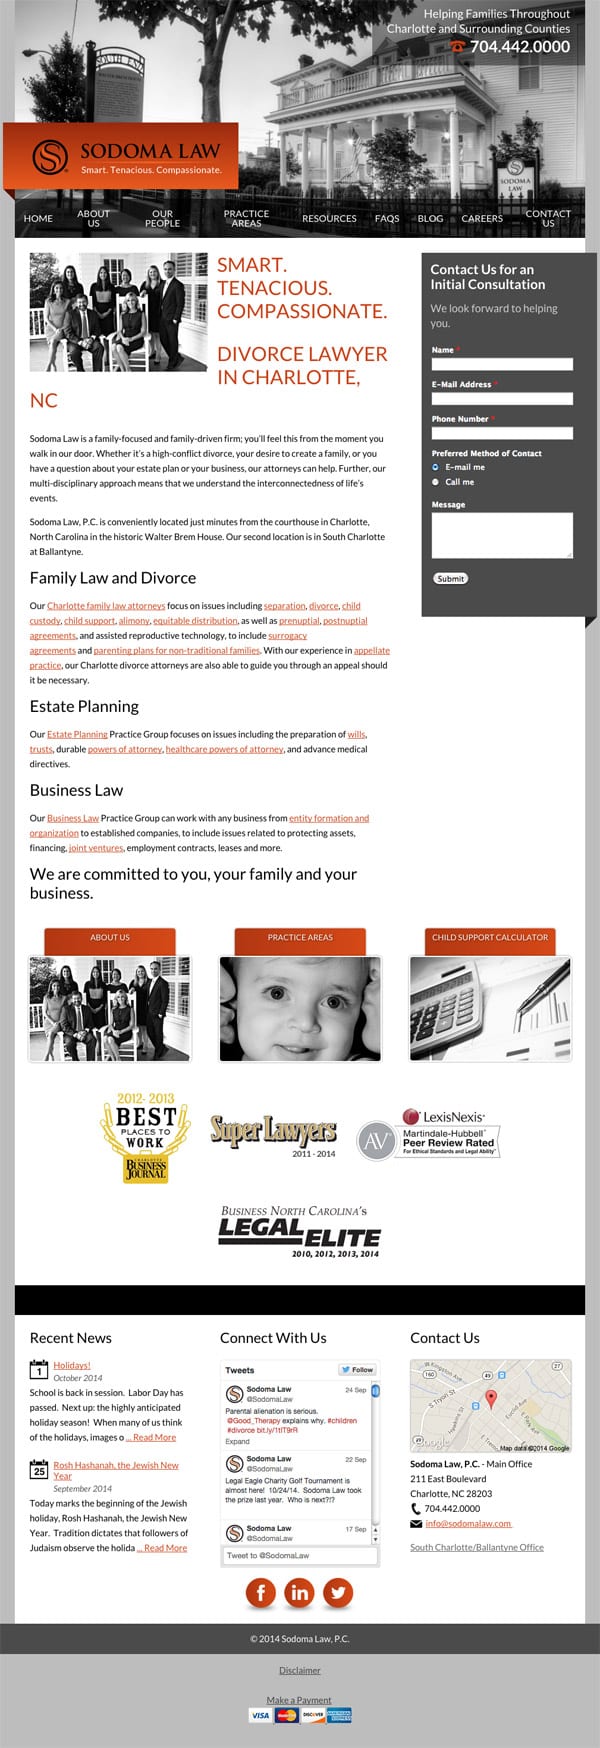 Law Firm Website for Sodoma Law, P.C.